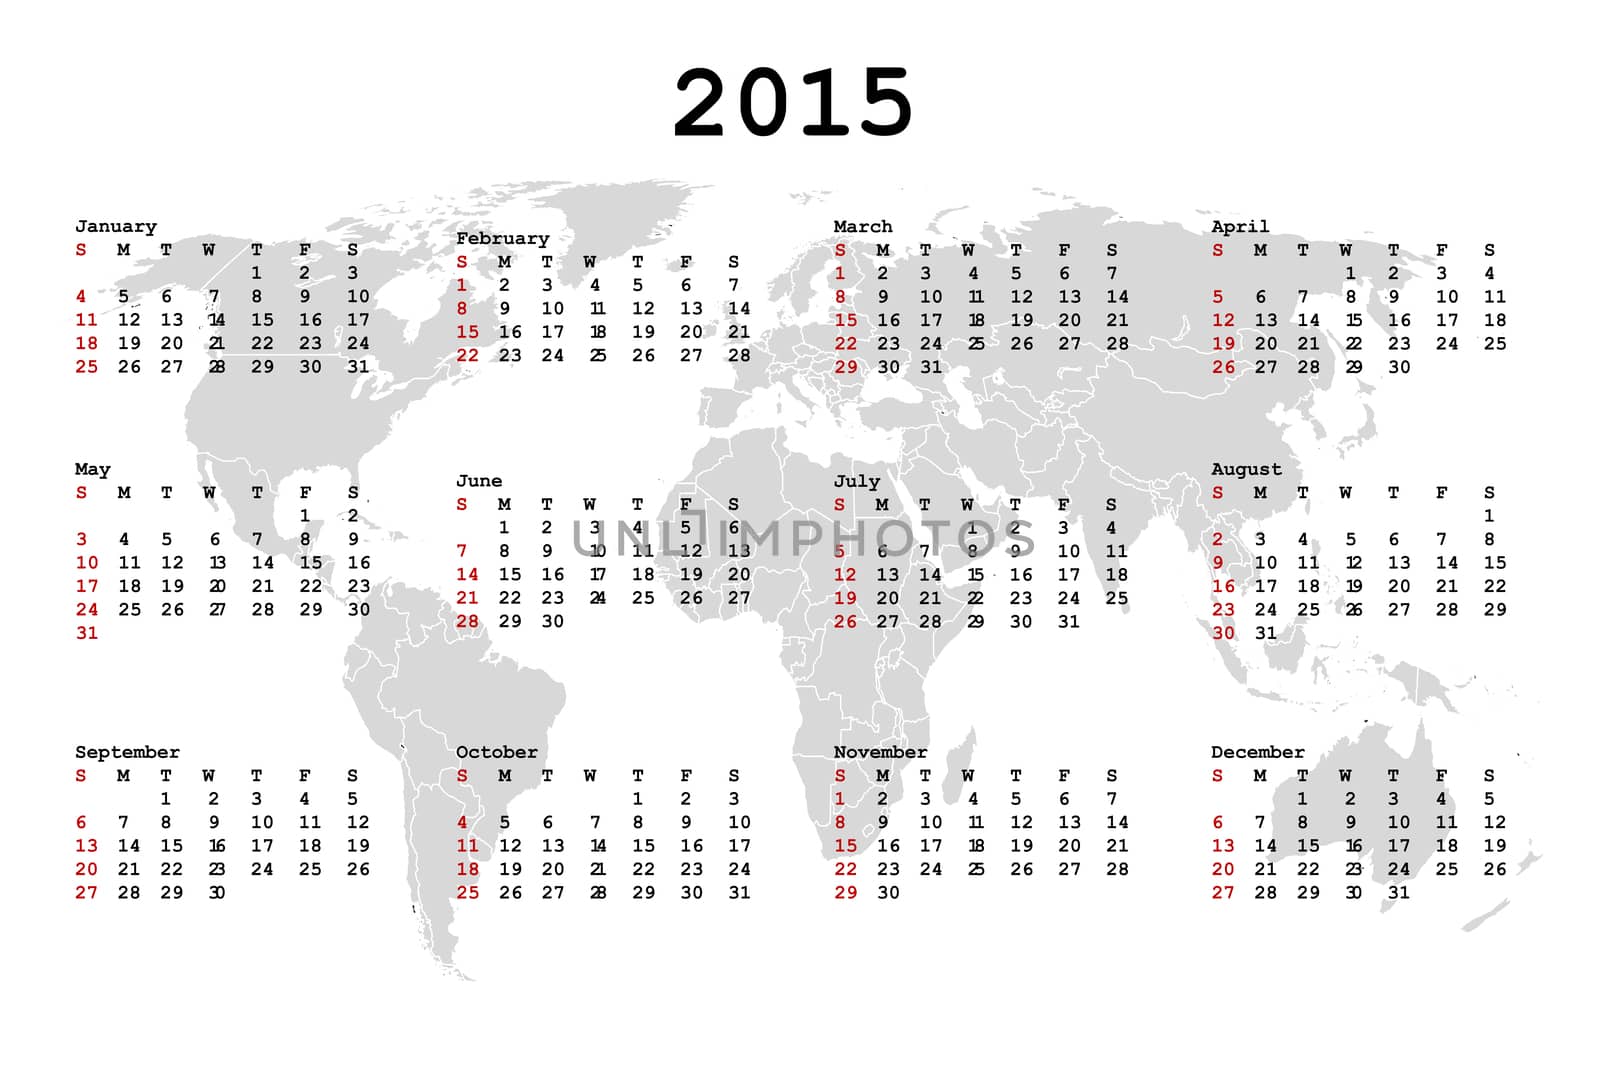 2015 Calendar for agenda with world map by hibrida13